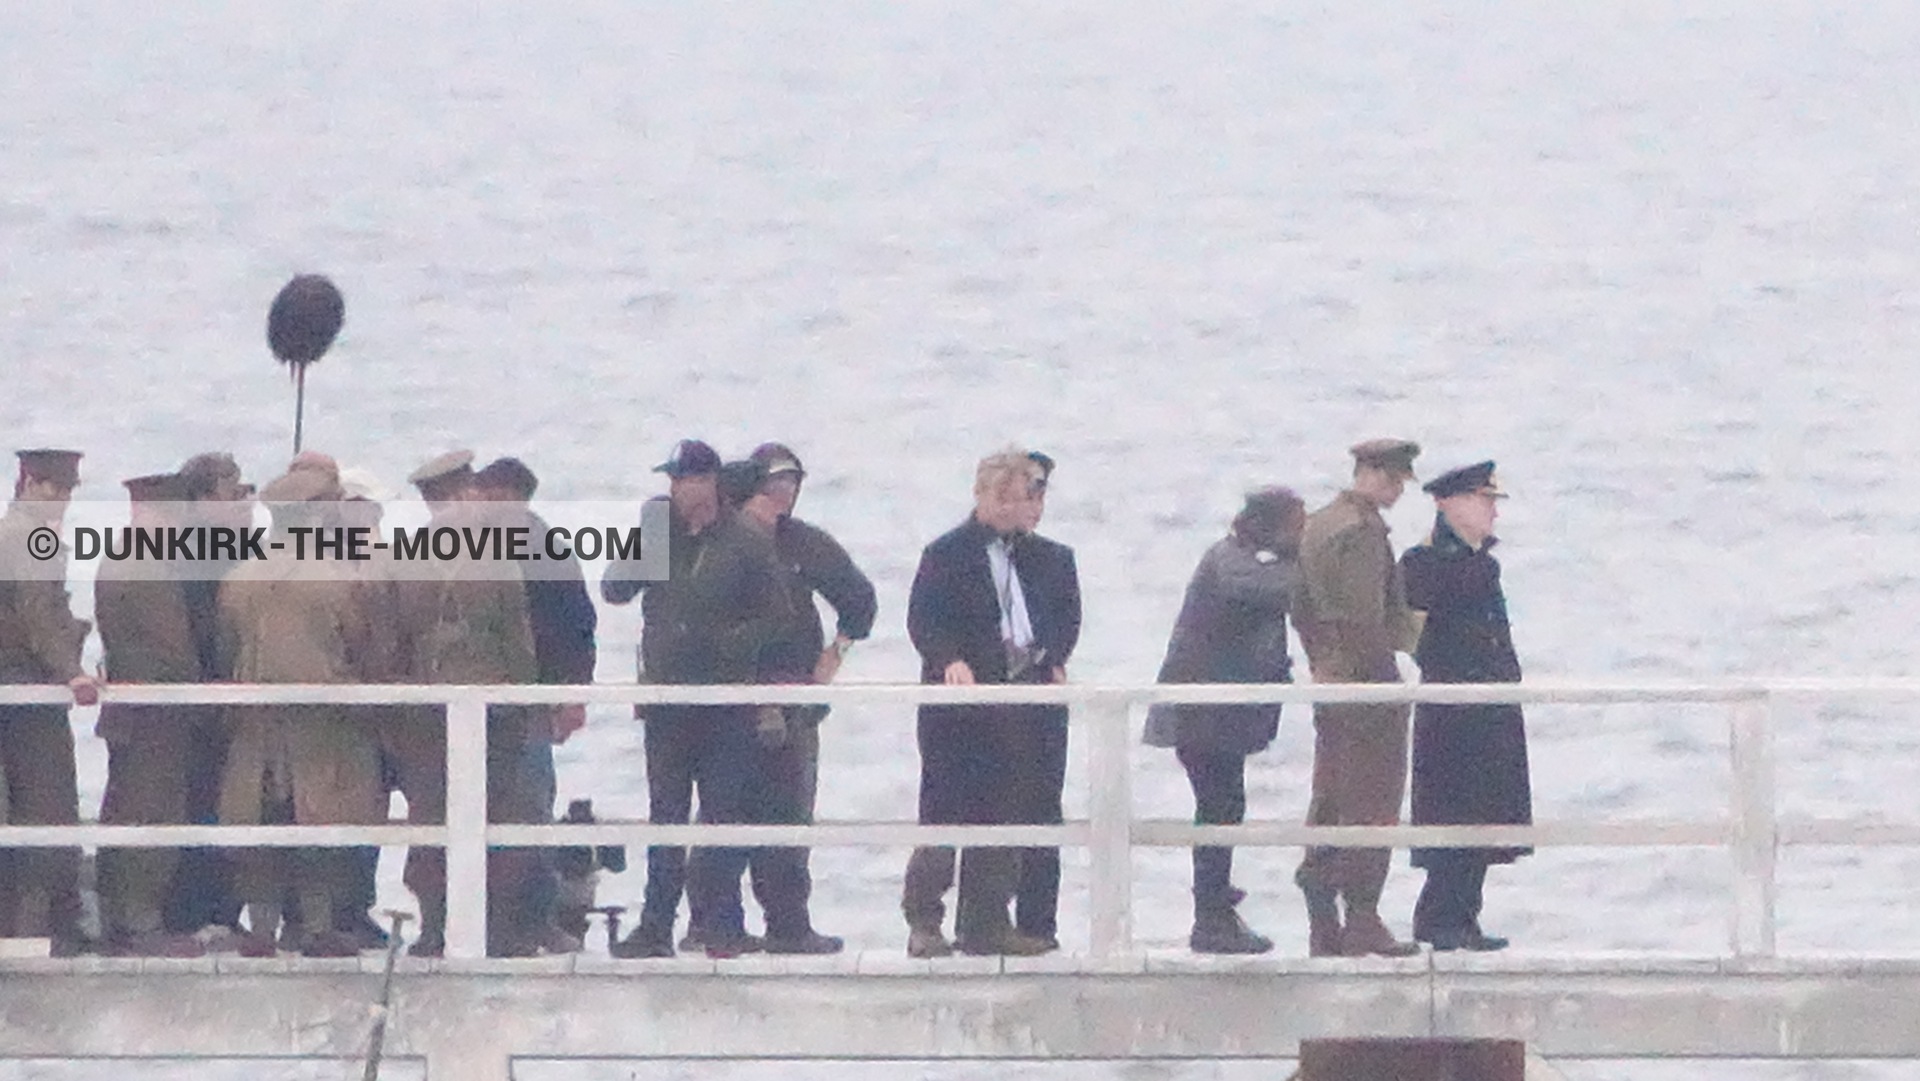 Picture with actor, Hoyte van Hoytema, EST pier, Kenneth Branagh, Christopher Nolan, technical team,  from behind the scene of the Dunkirk movie by Nolan